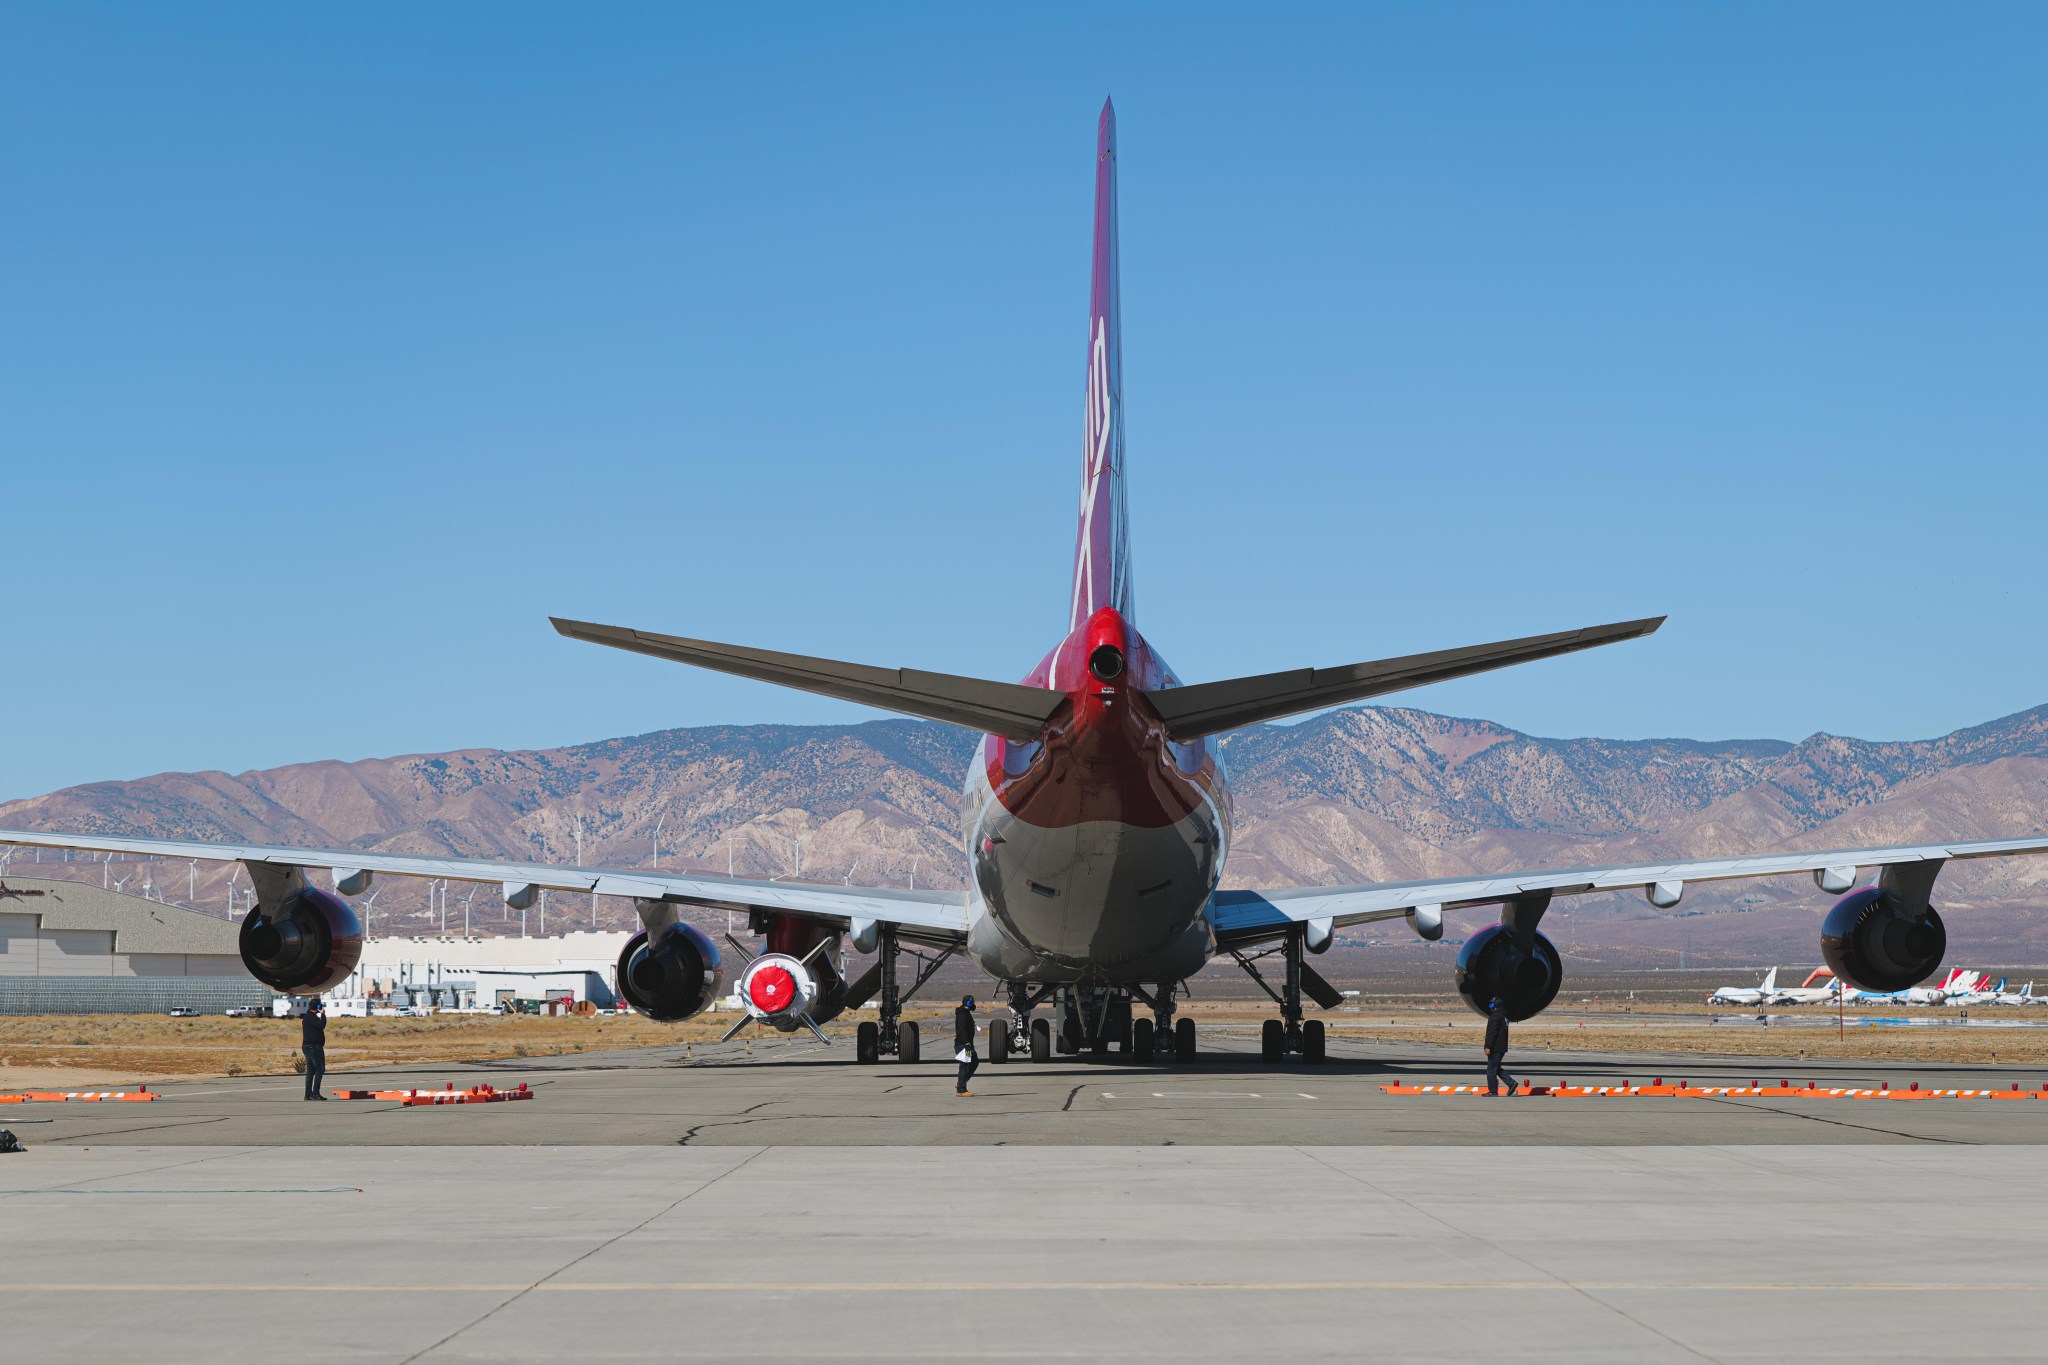 Virgin Orbit's carrier aircraft Cosmic Girl is staged on a taxiway at the Mojave Air and Space Port in California.